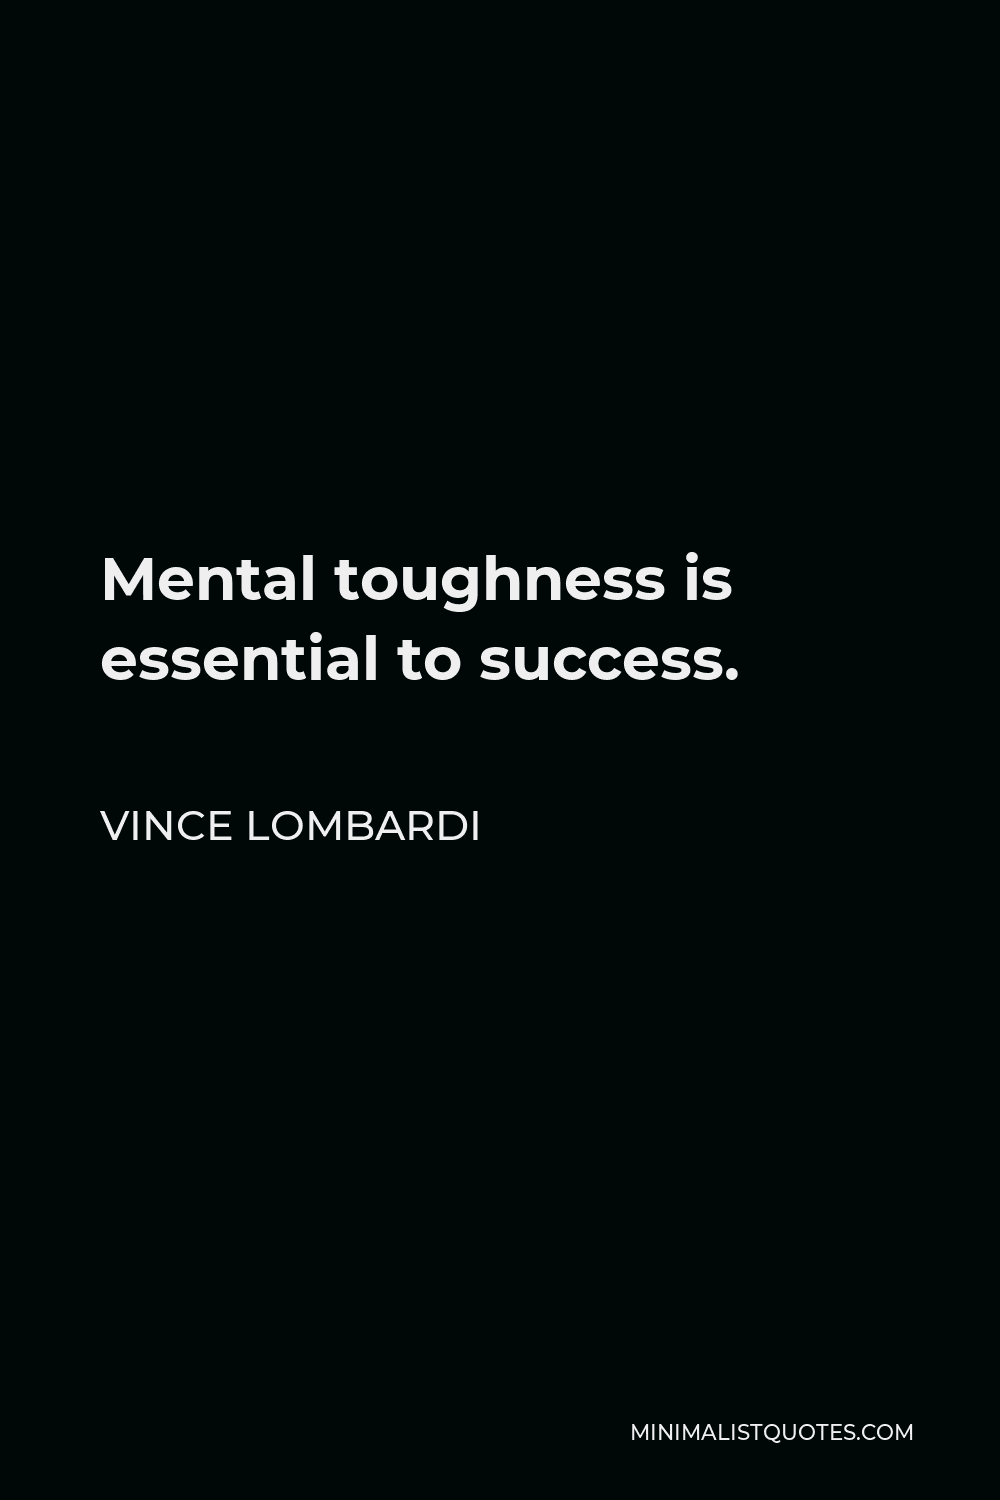 Vince Lombardi Quote - Mental toughness is essential to success.